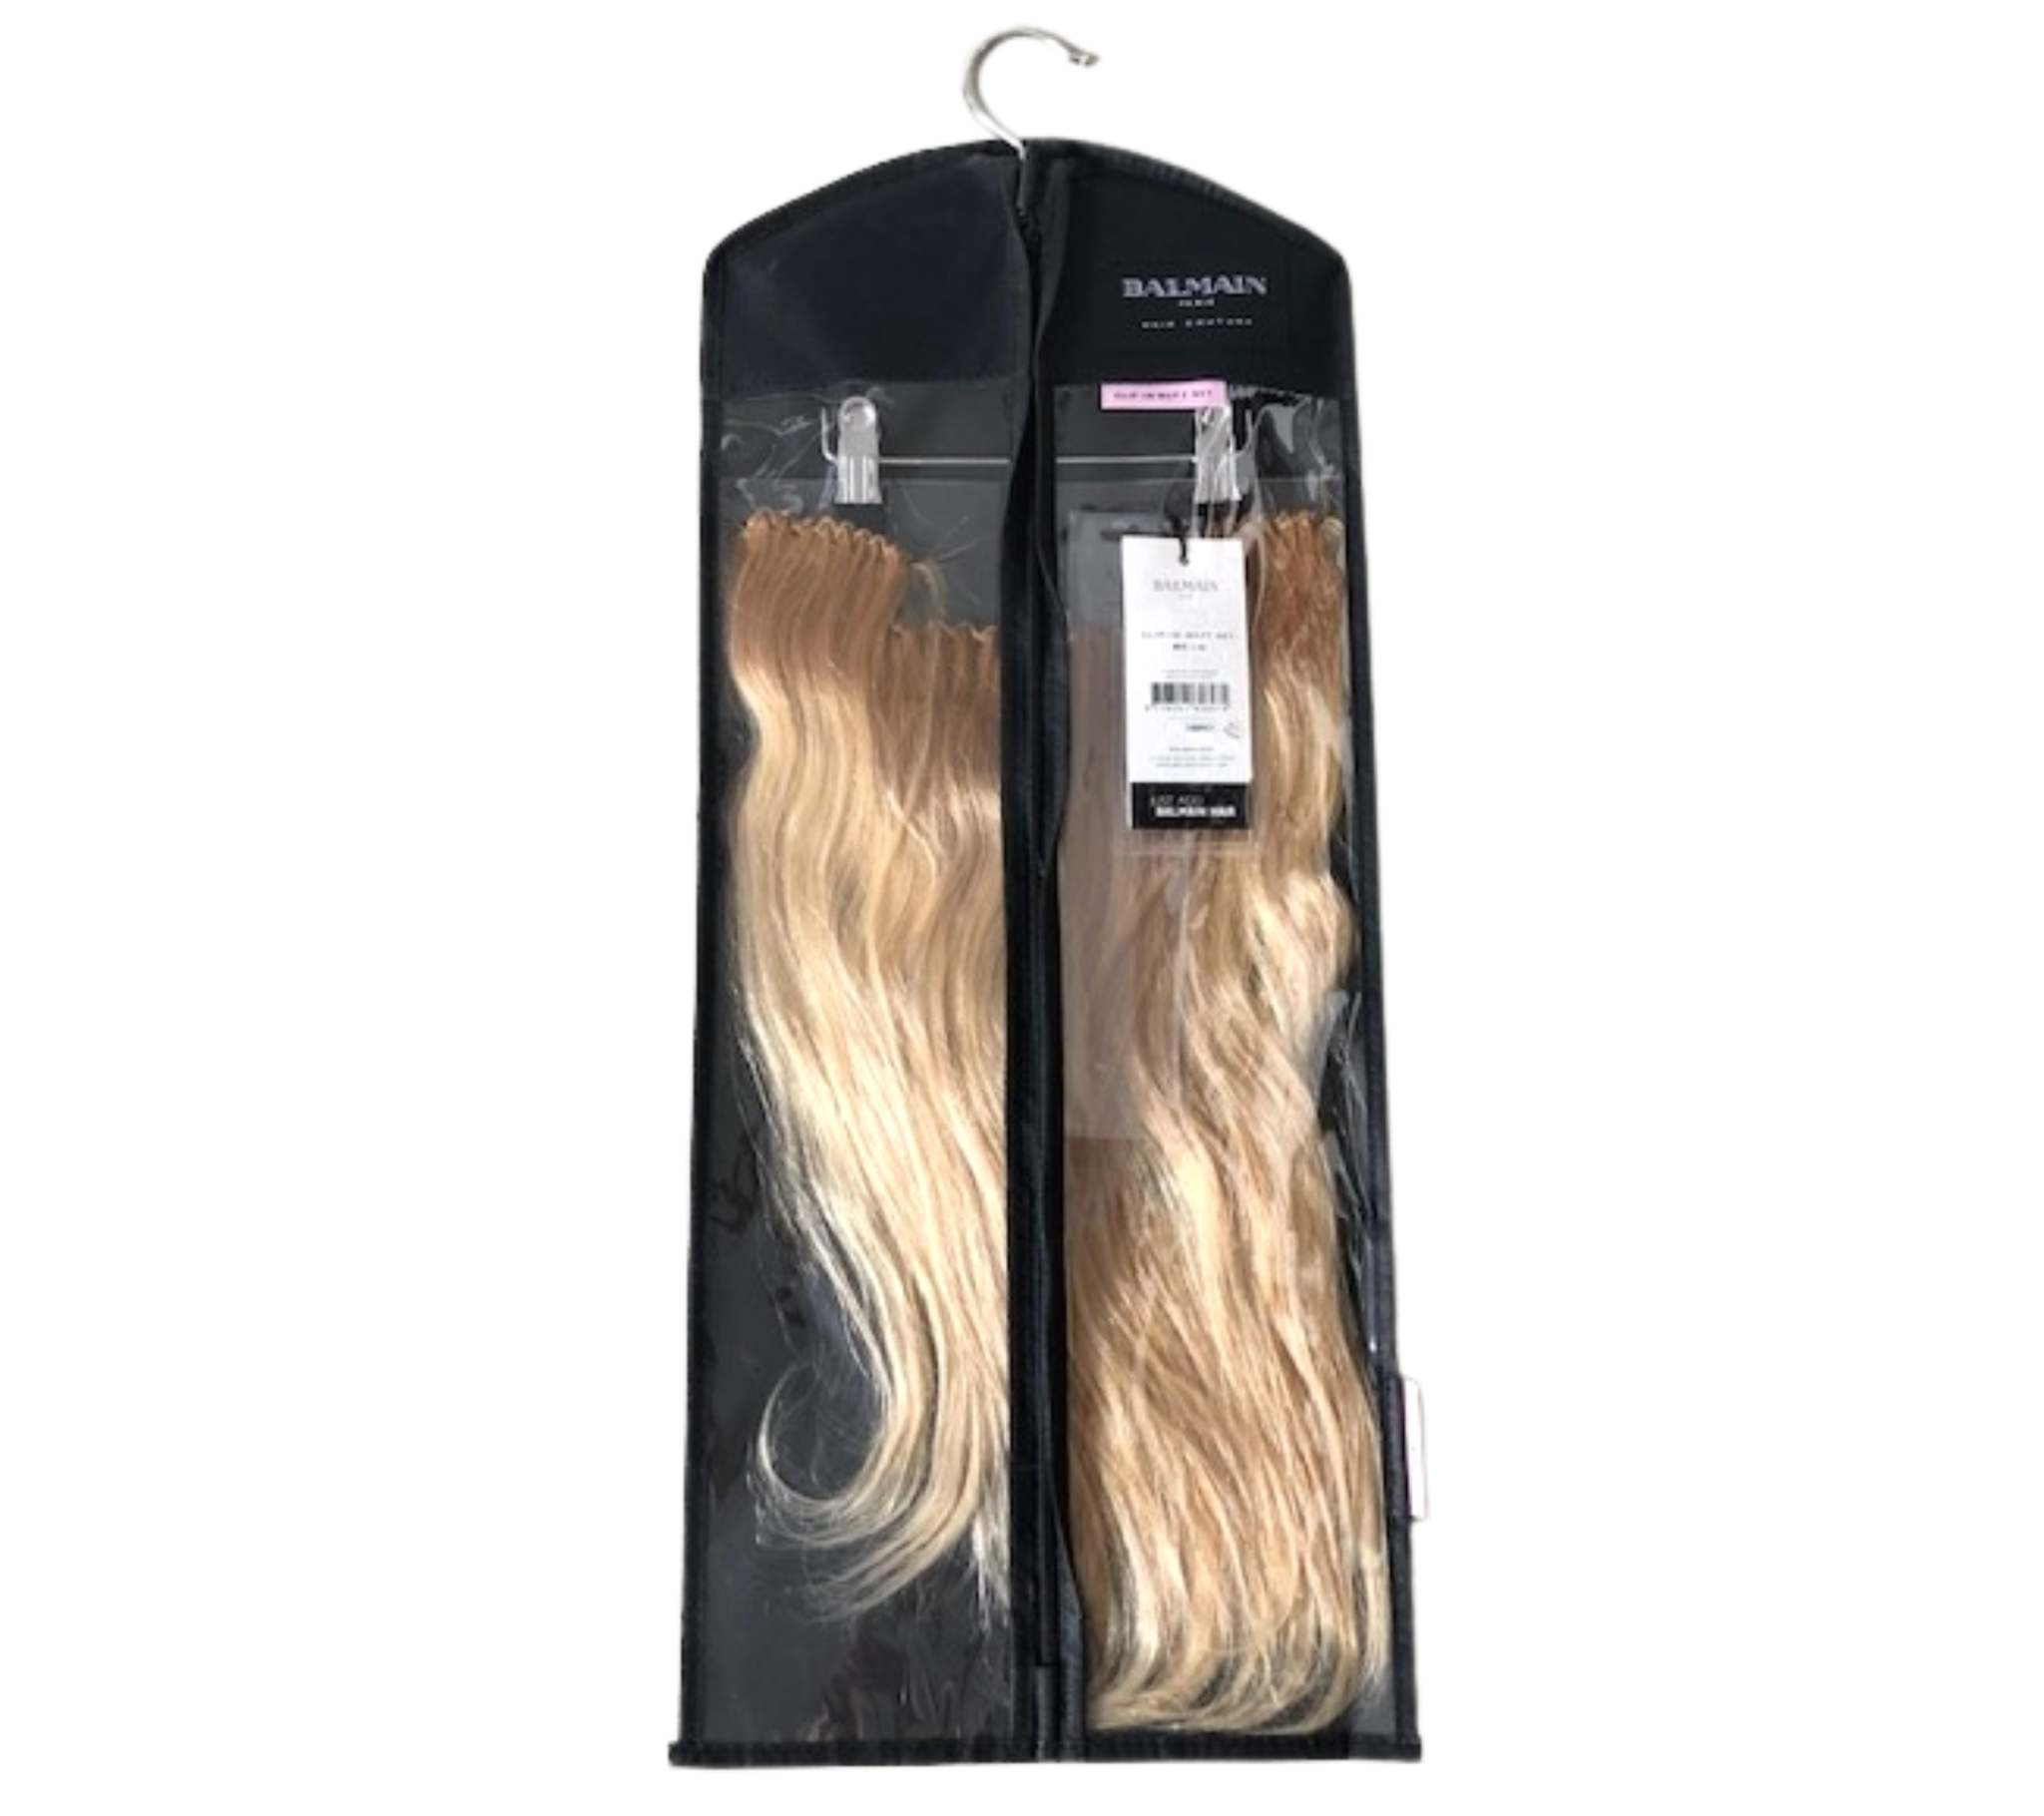 syg Teoretisk Marquee Balmain Clip in Weft human hair 40 cm - Pro Tan Benelux